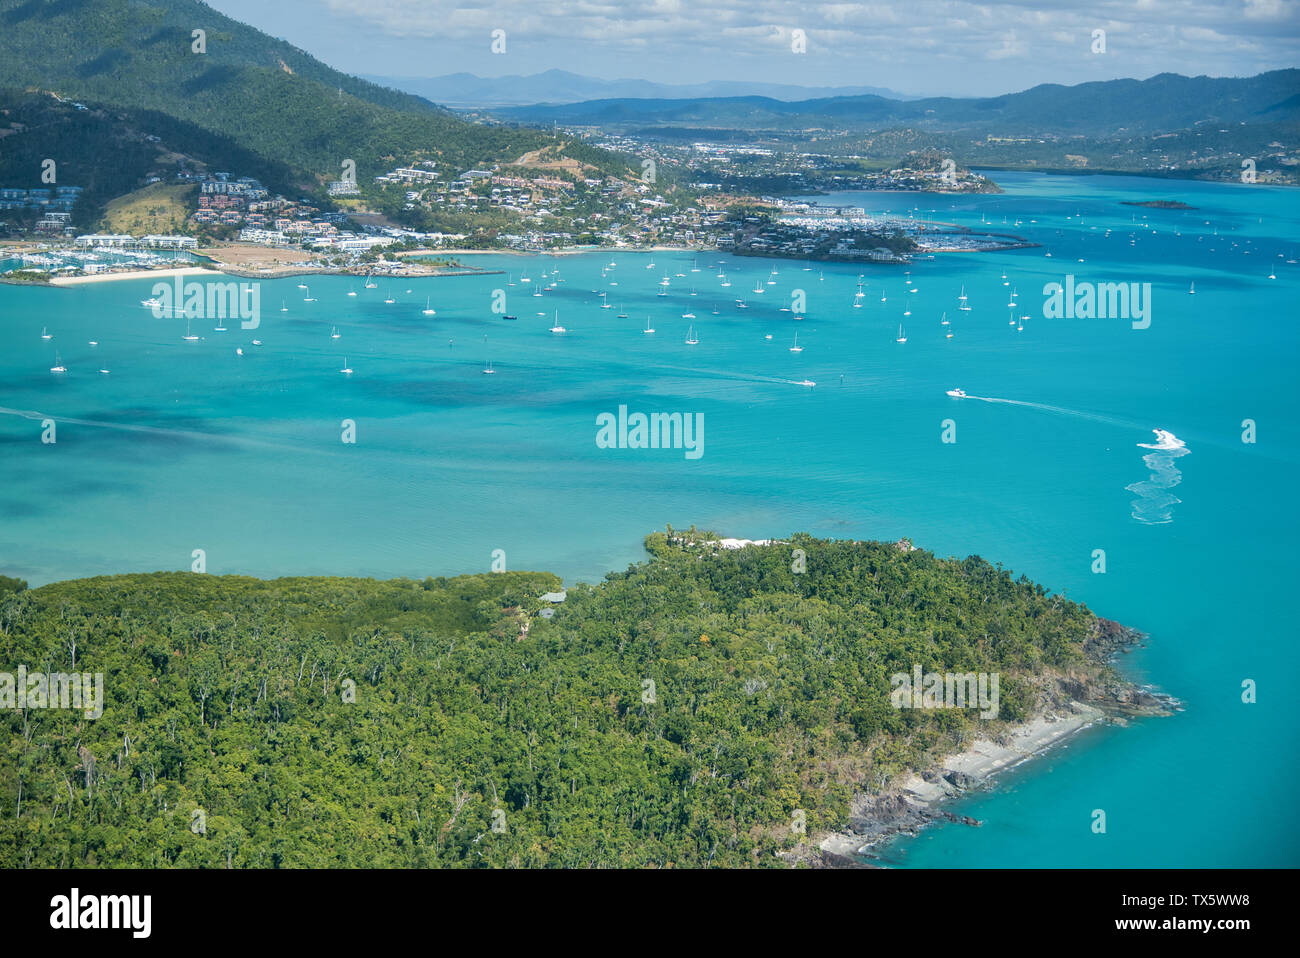 Airlie Beach coastline as seen from airplane. Stock Photo